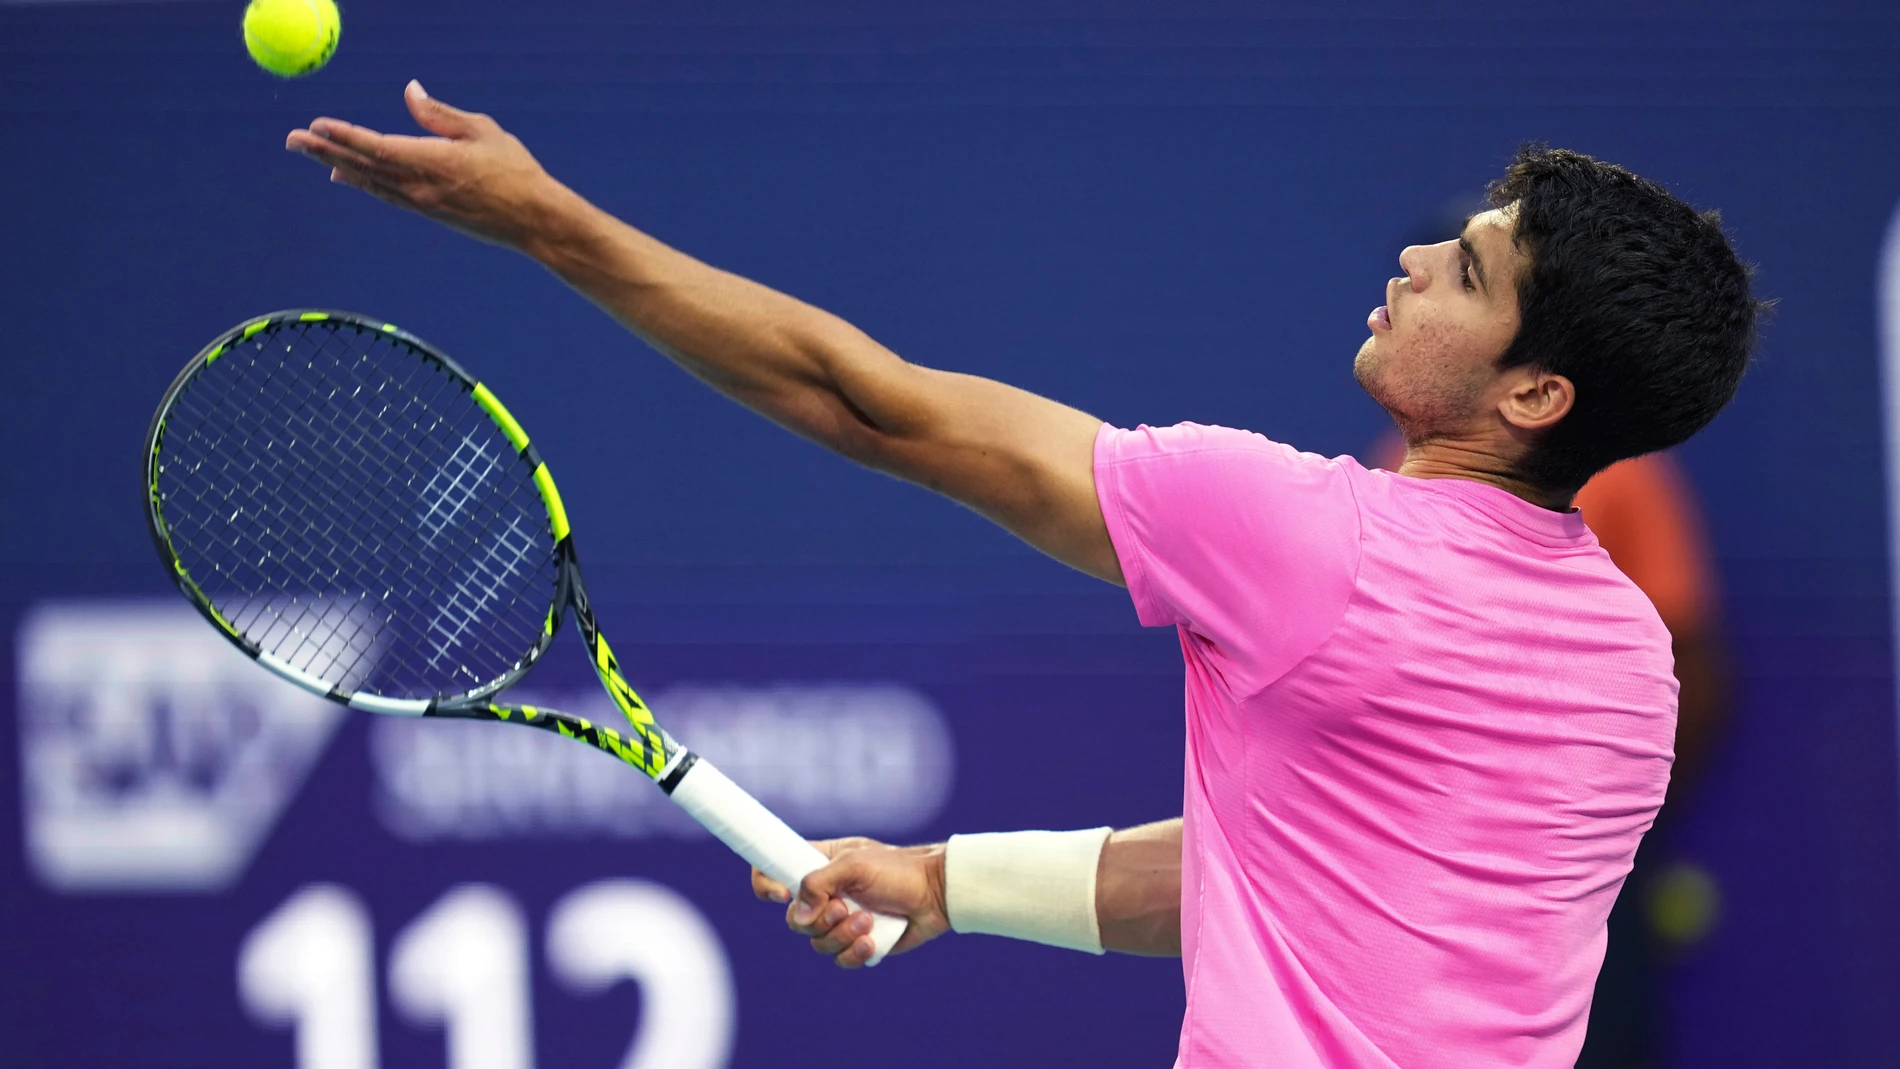 Carlos Alcaraz, of Spain, tosses the ball for a serve to Taylor Fritz, of the United States, at the Miami Open tennis tournament Thursday, March 30, 2023, in Miami Gardens, Fla. (AP Photo/Jim Rassol)